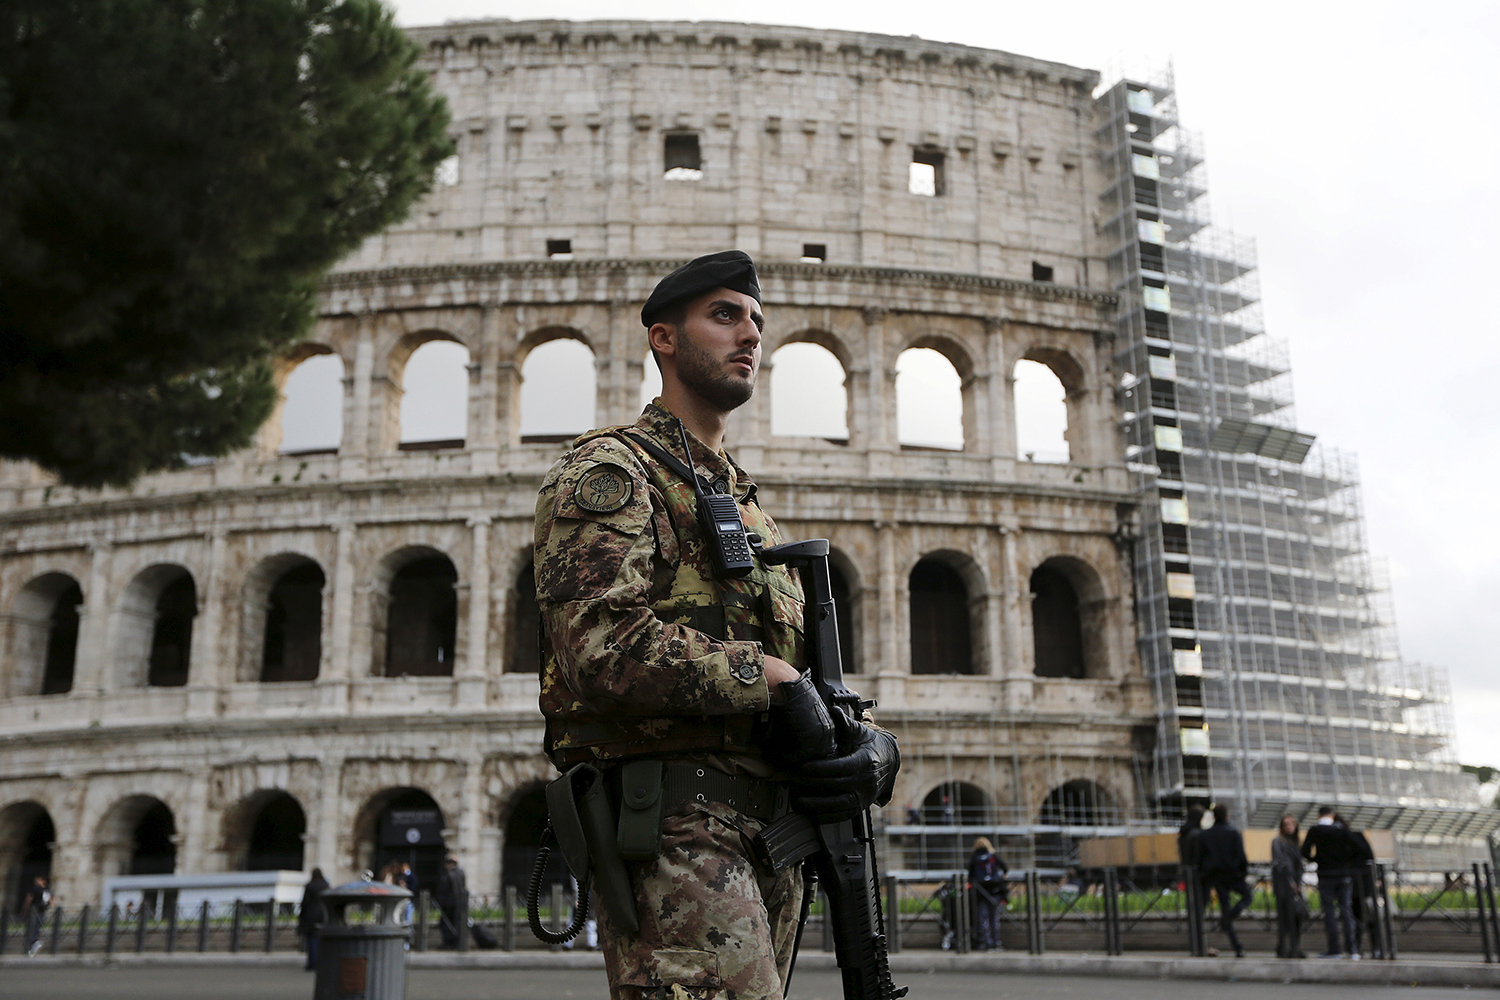 Italy increases security in Rome and Milan after Paris attacks